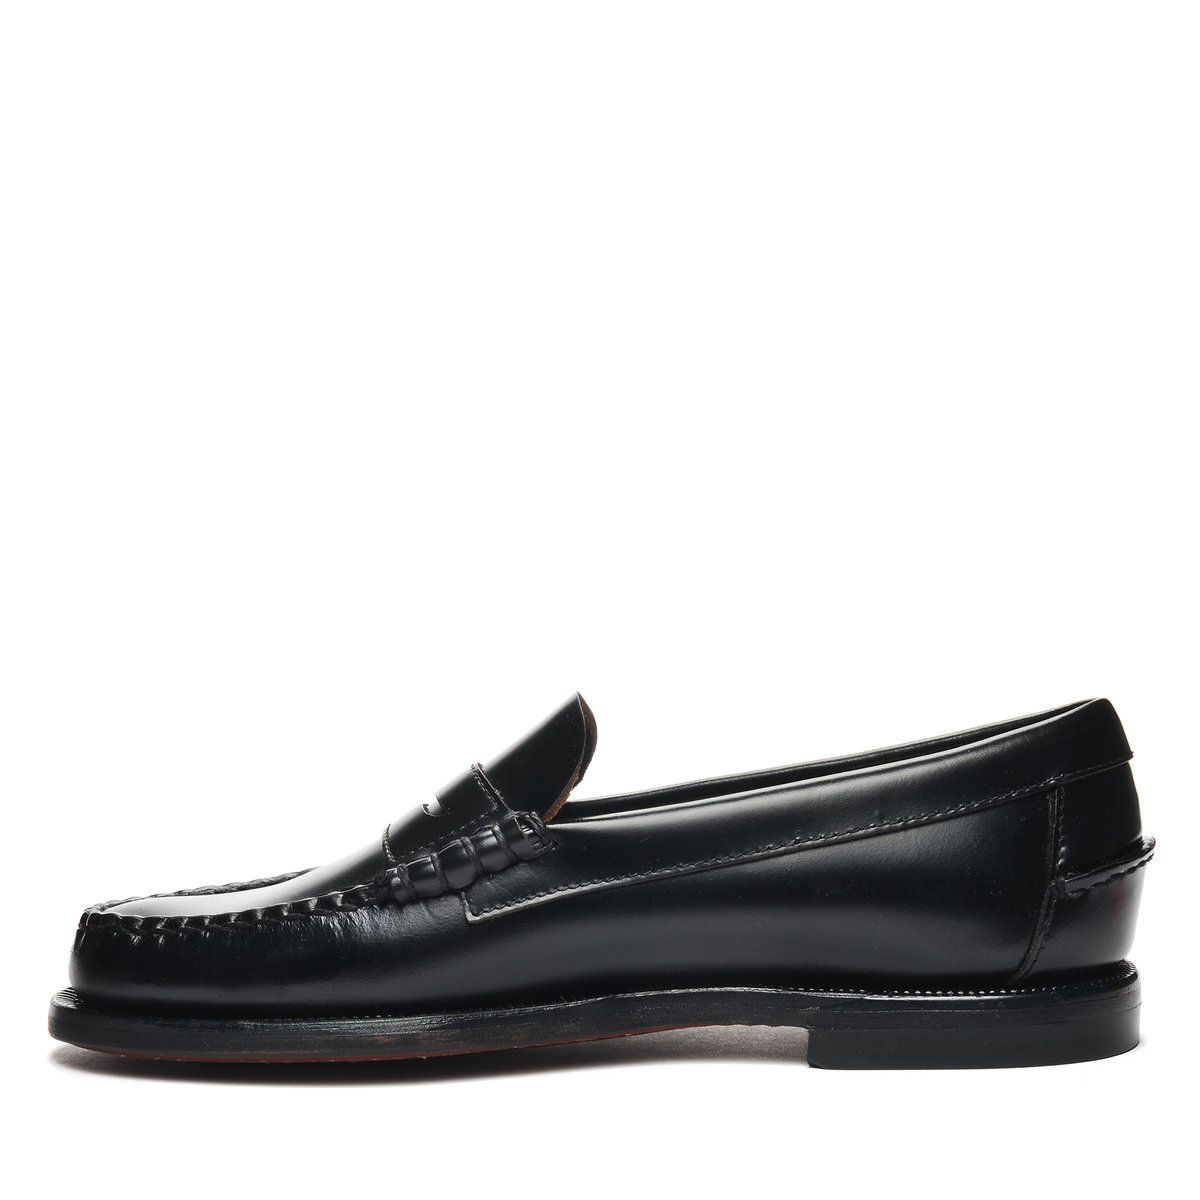 WOMEN'S CLASSIC DAN LEATHER LOAFER